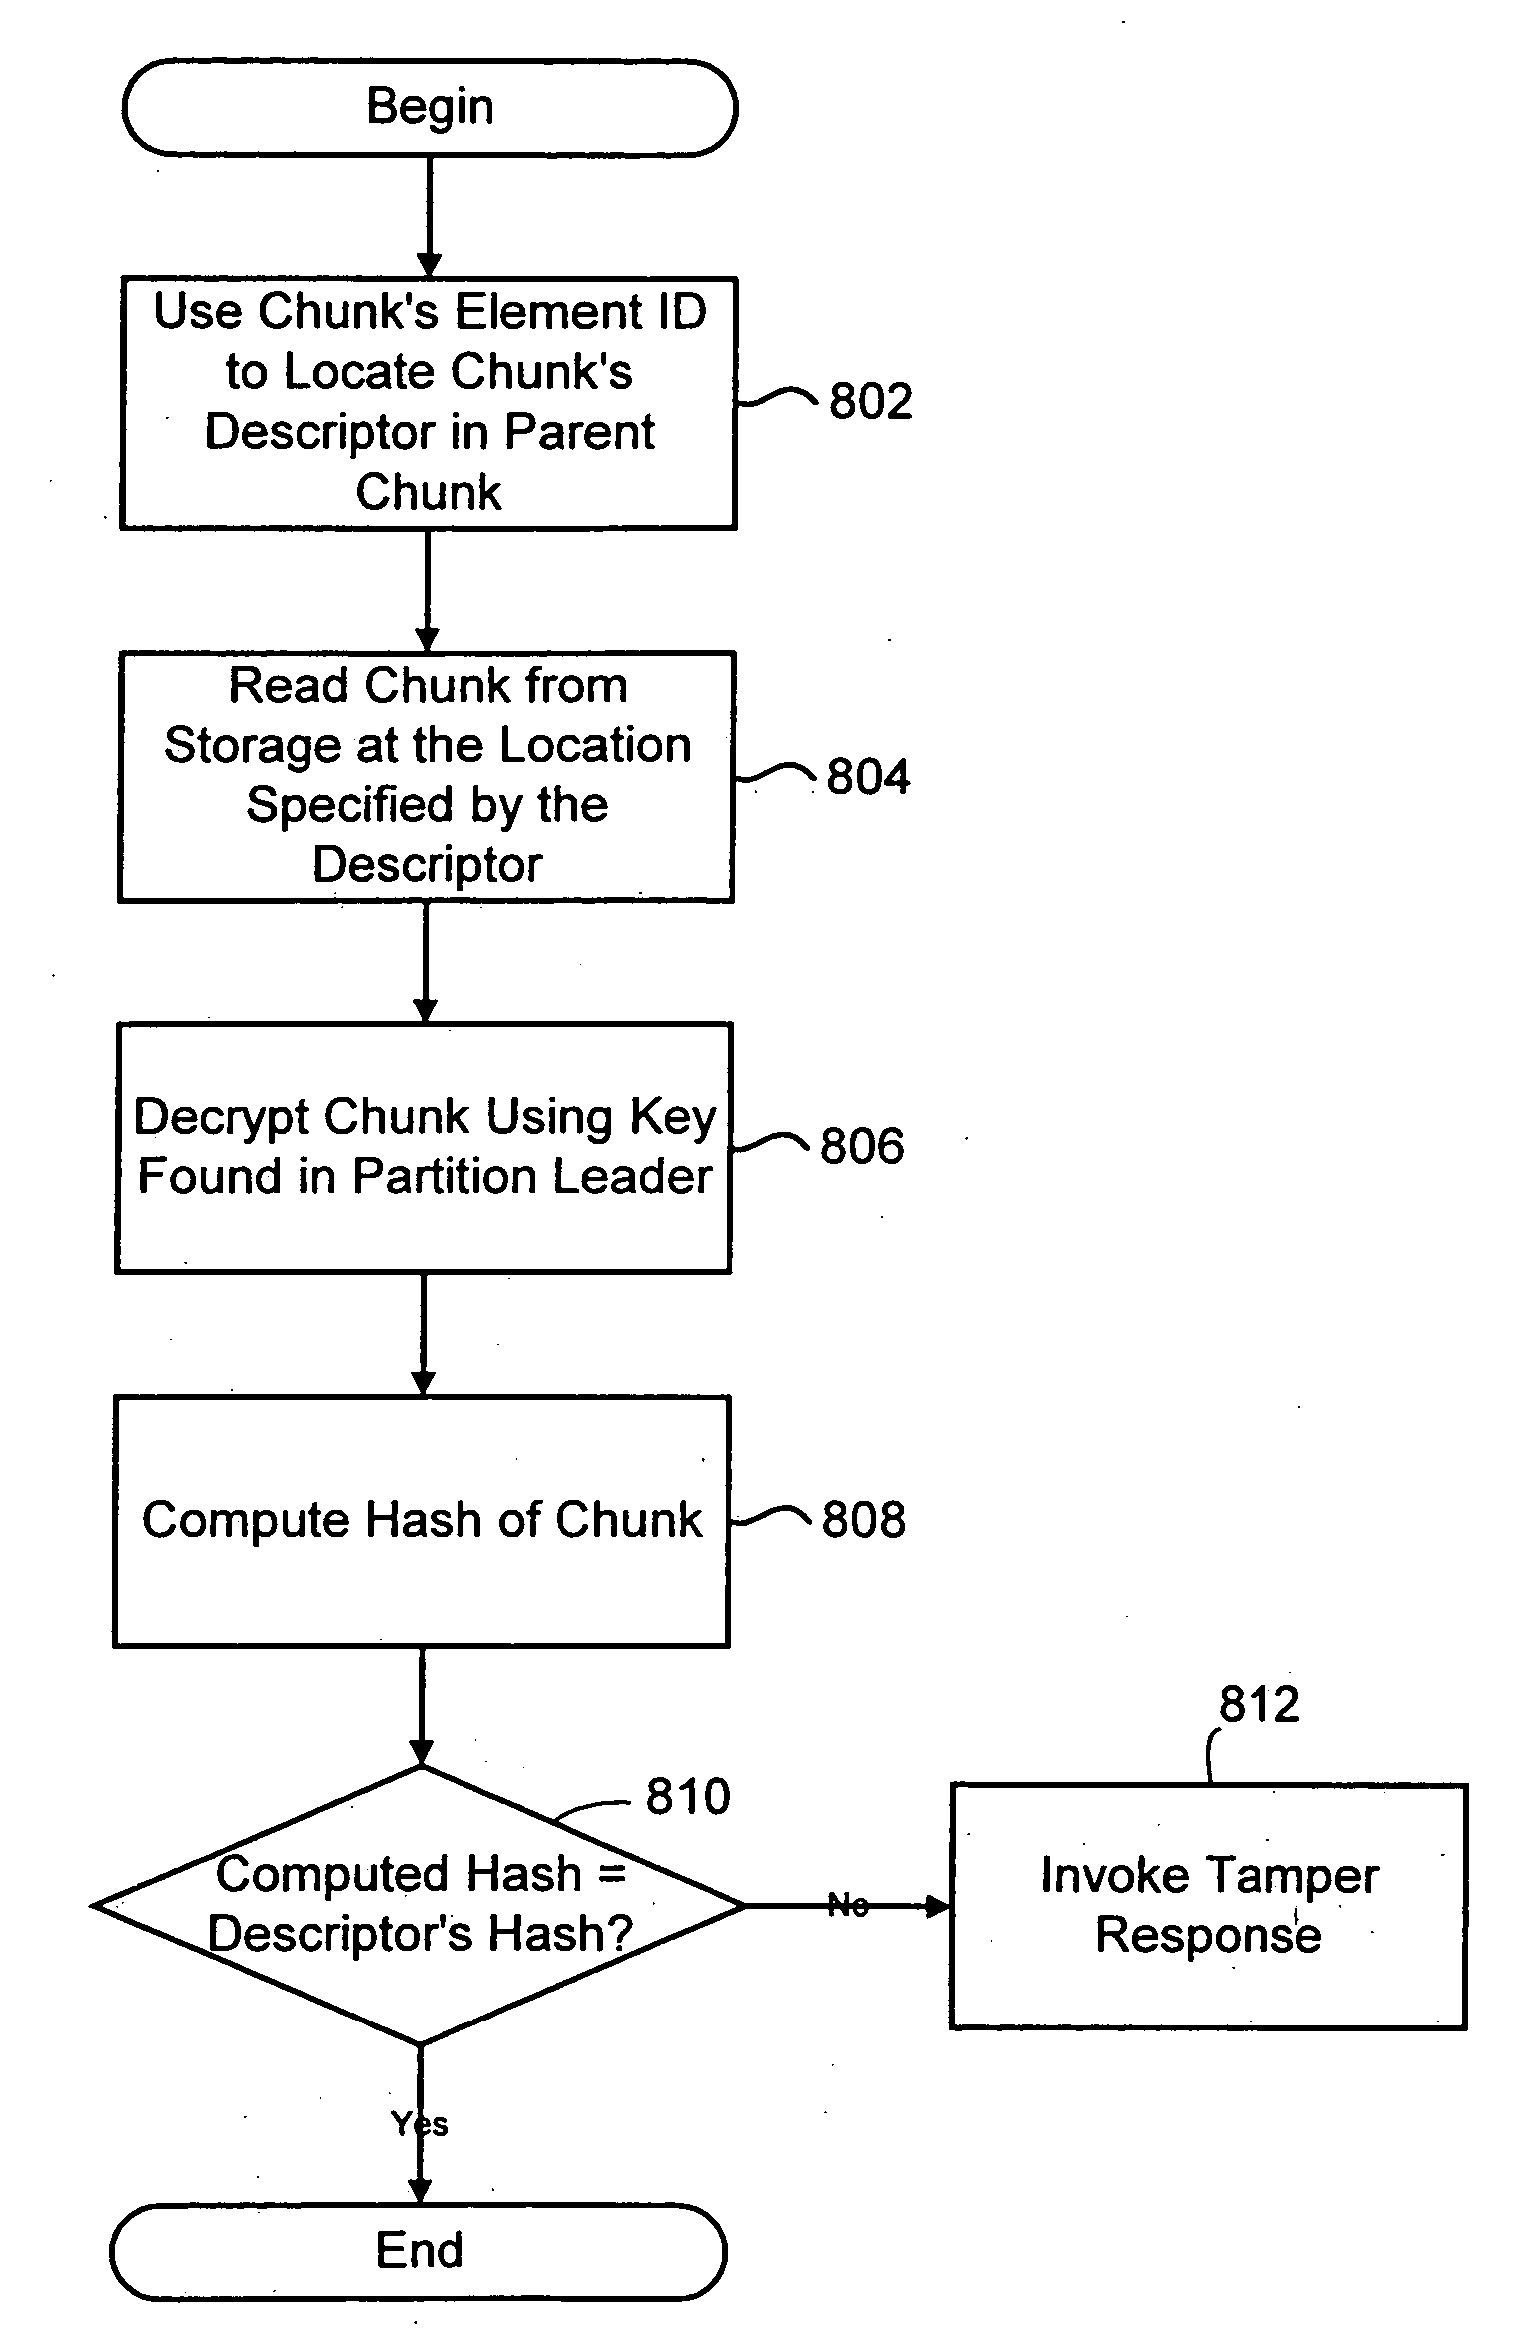 Trusted storage systems and methods